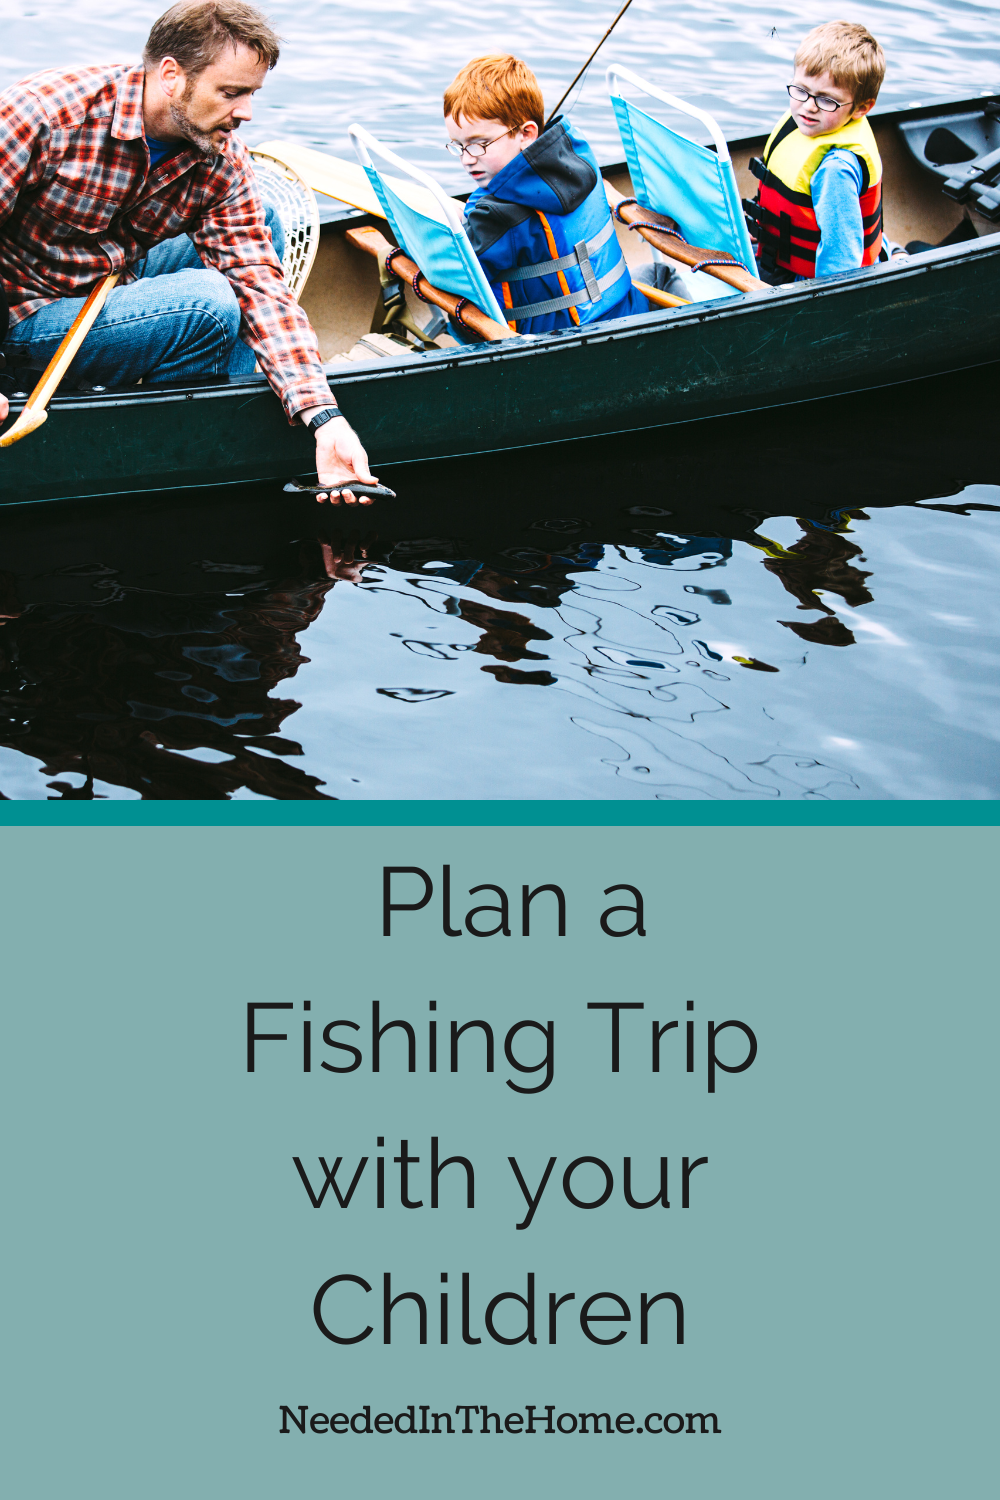 pinterest pin description plan a fishing trip with your children boat with father holding a fish with two sons looking on neededinthehome